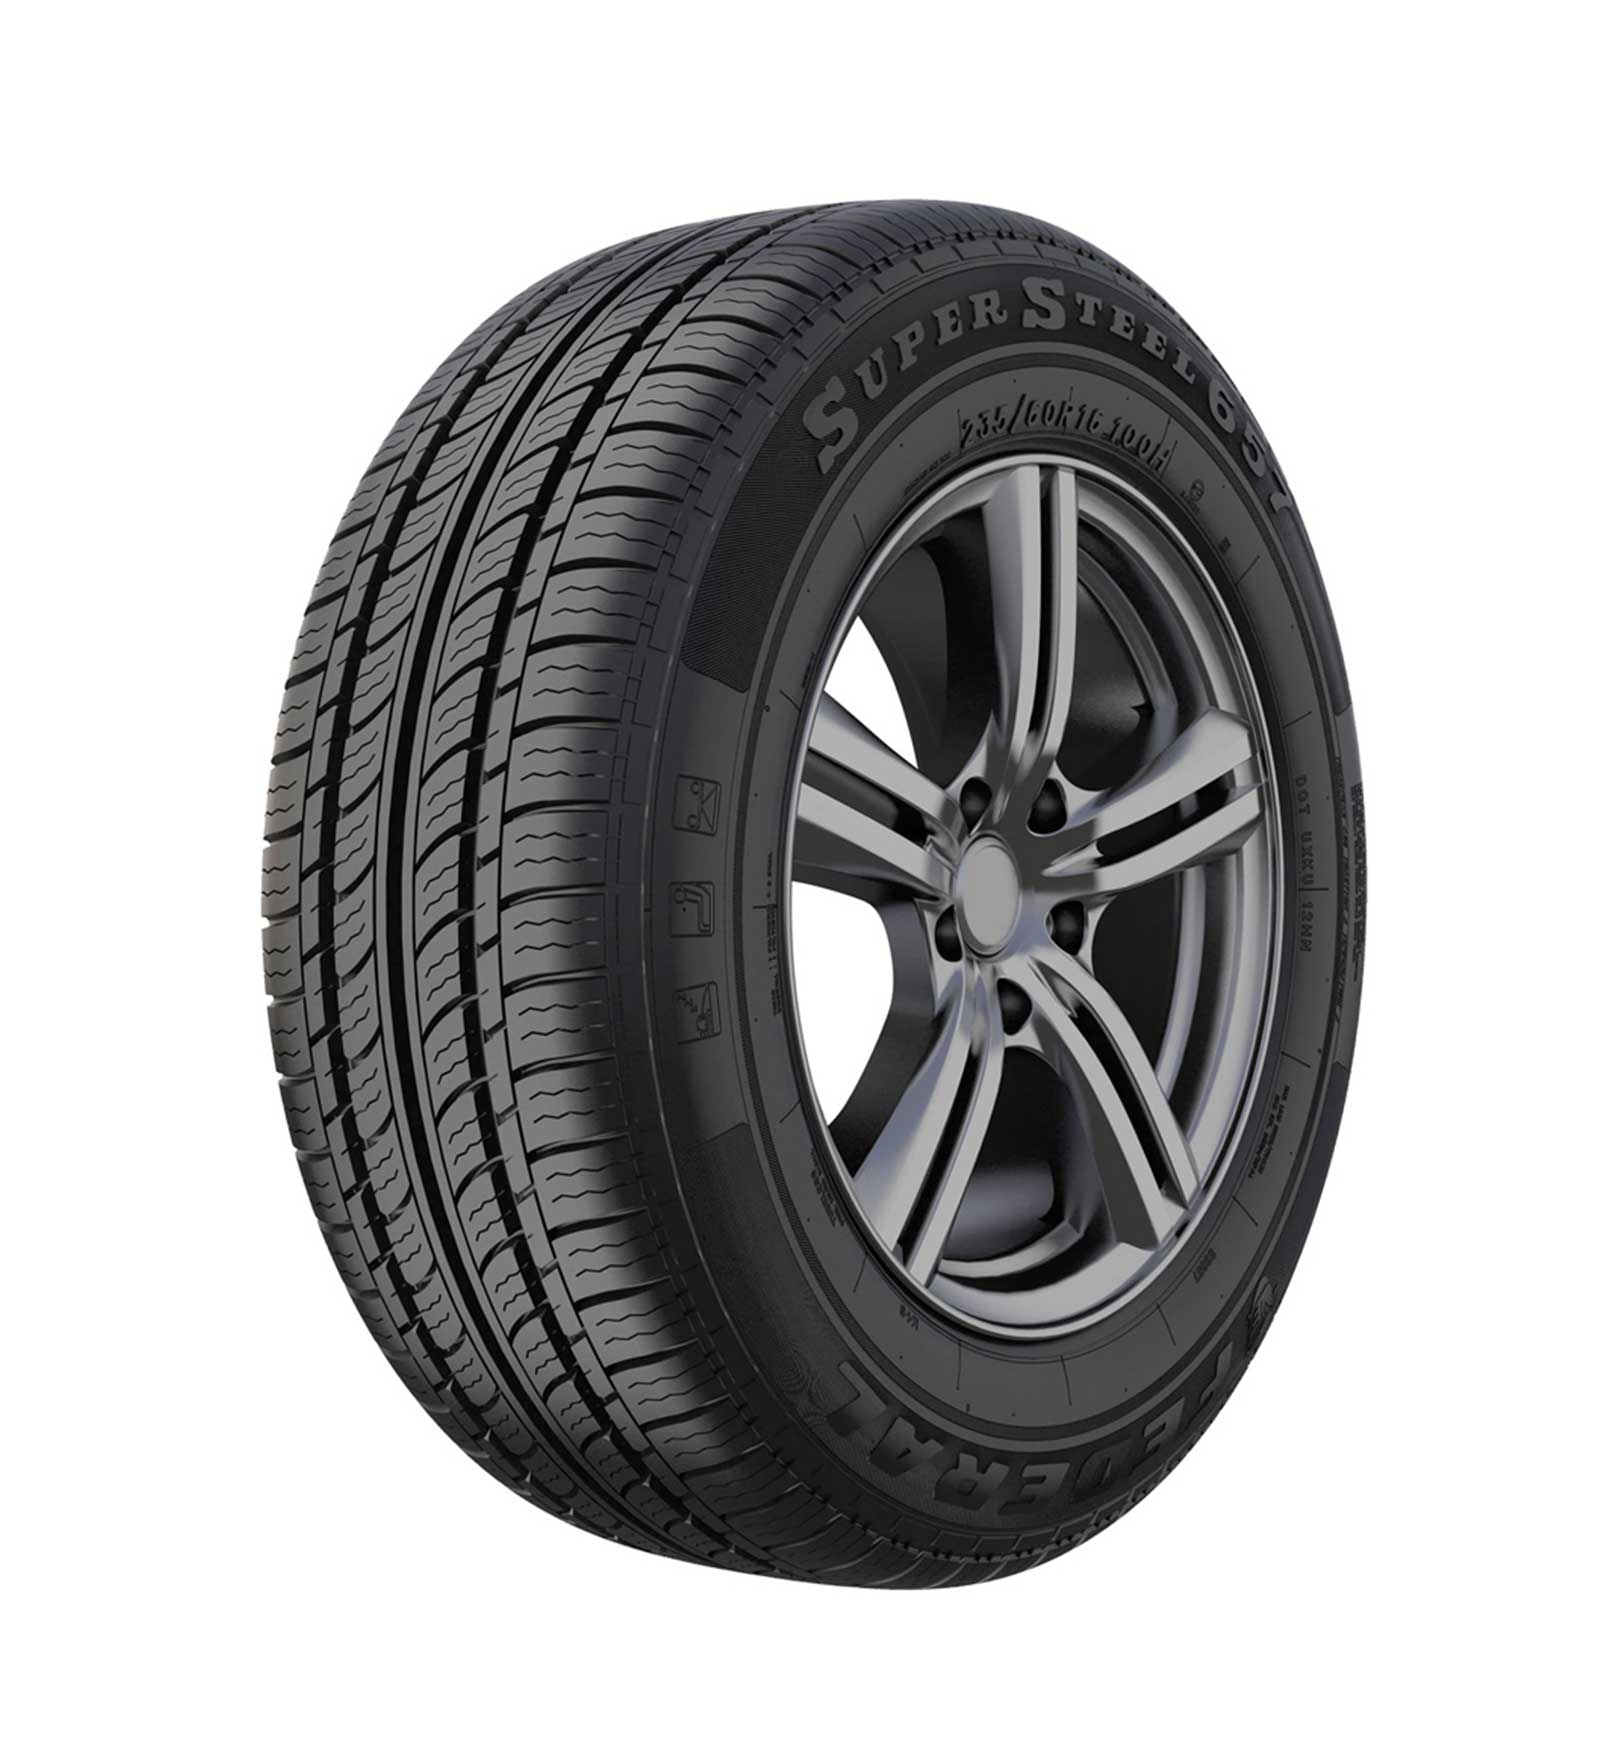 FEDERAL 175/70R13 82T SS657